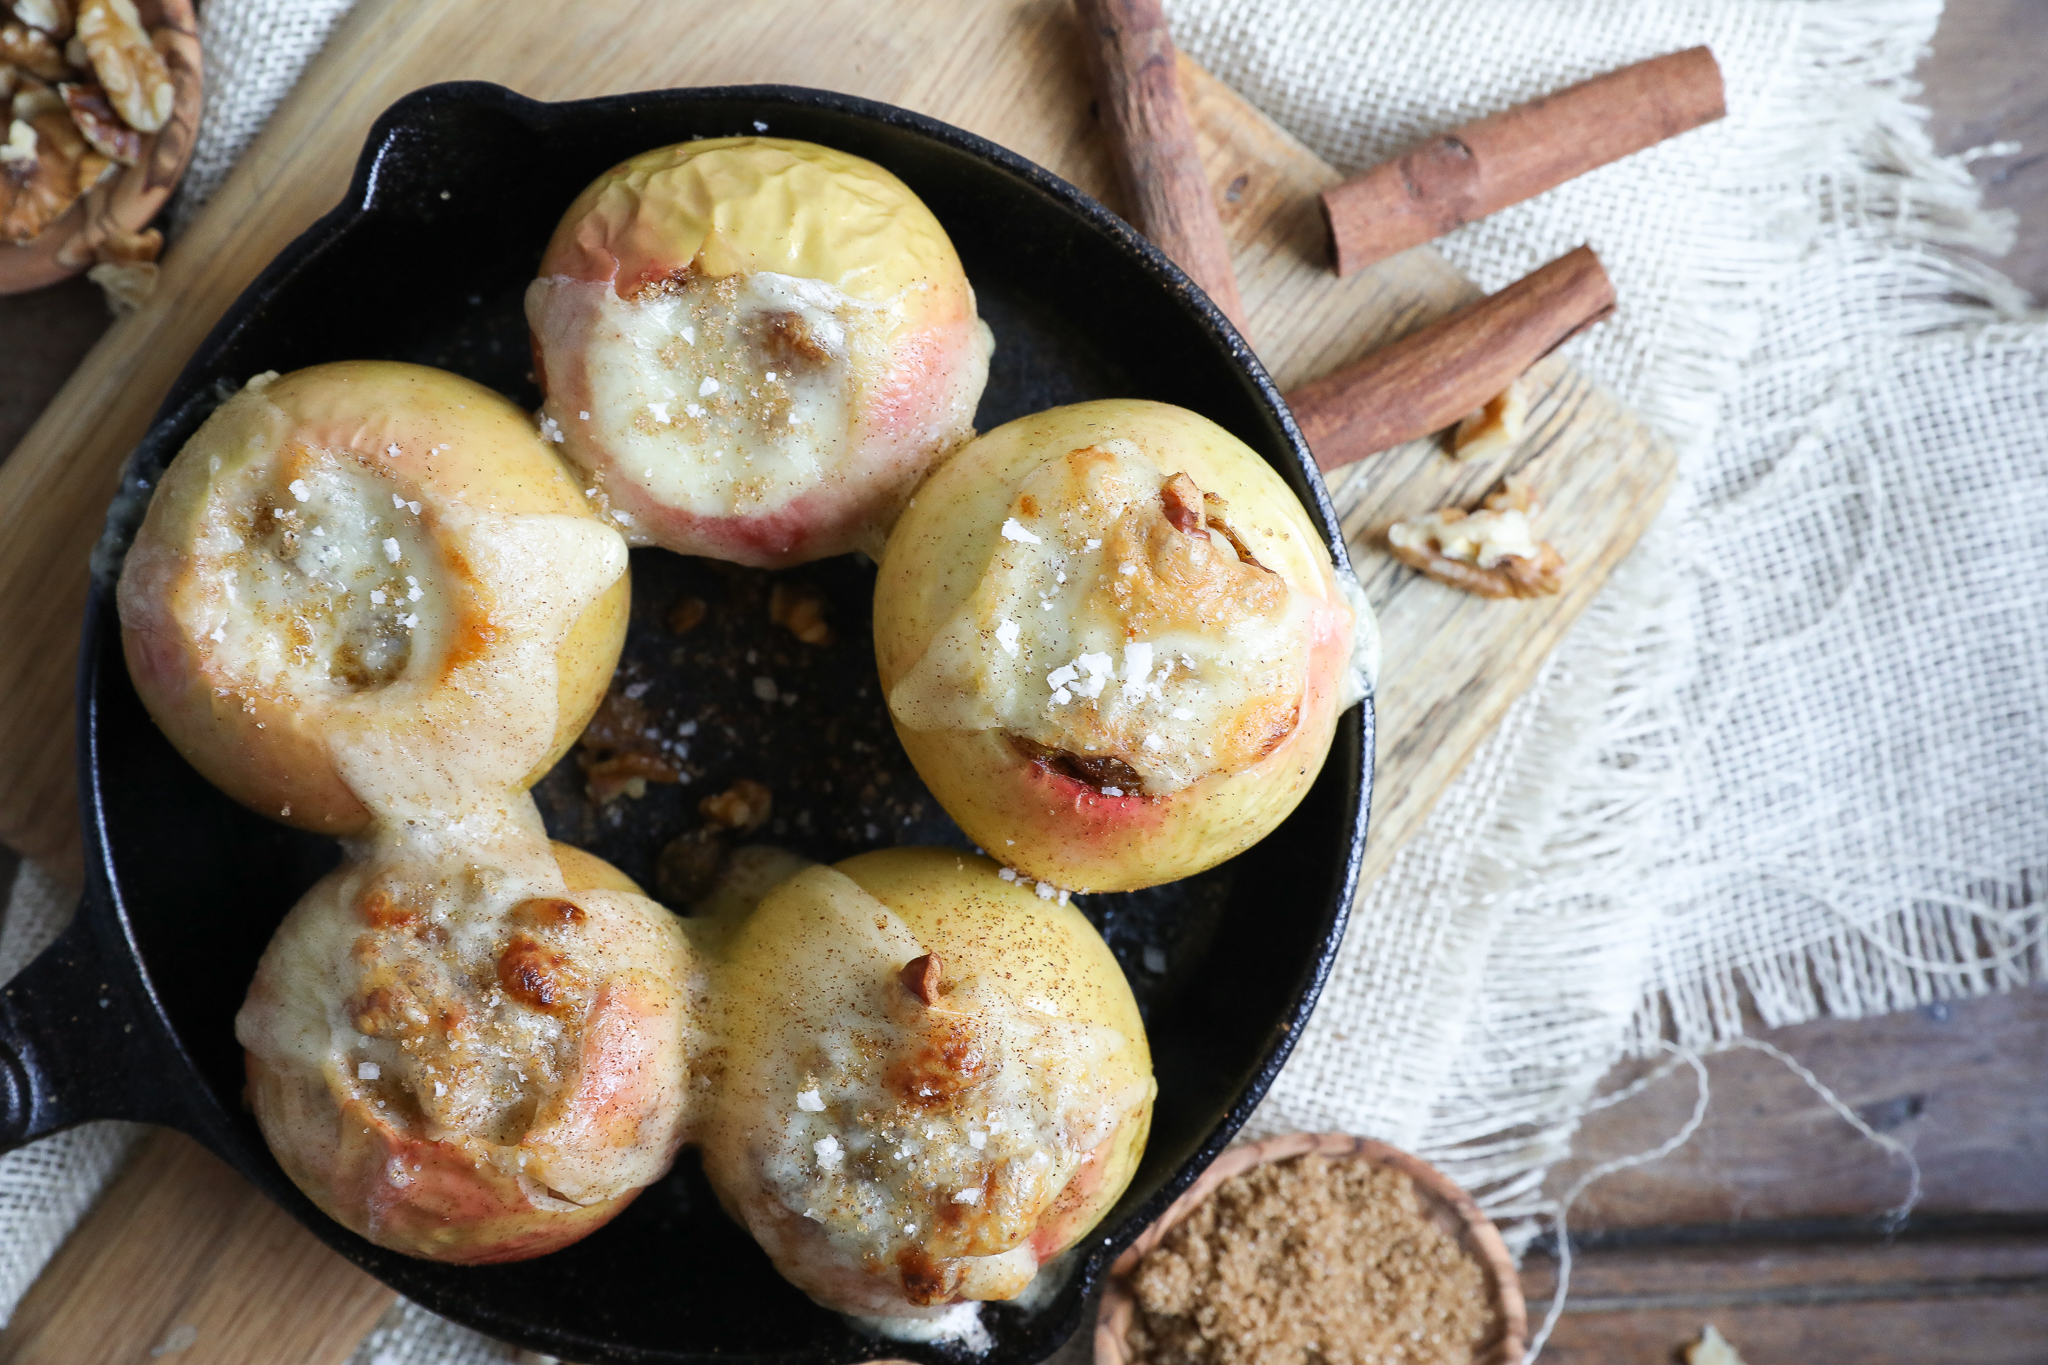 An image of baked stuffed apples